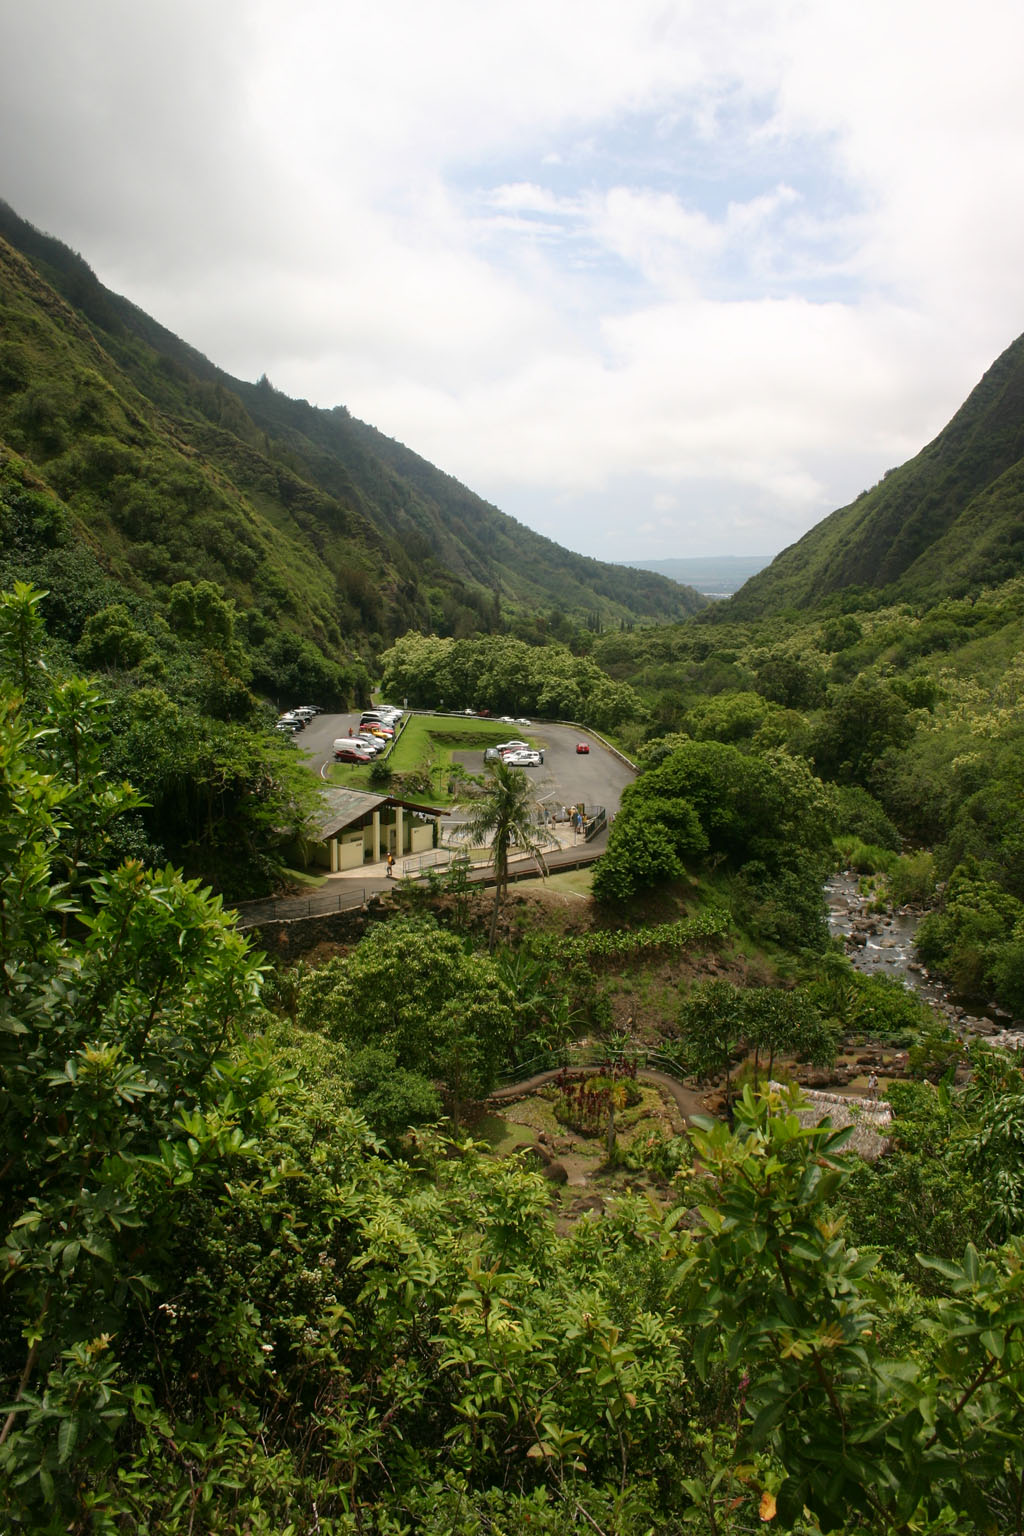 Iao Valley State Park